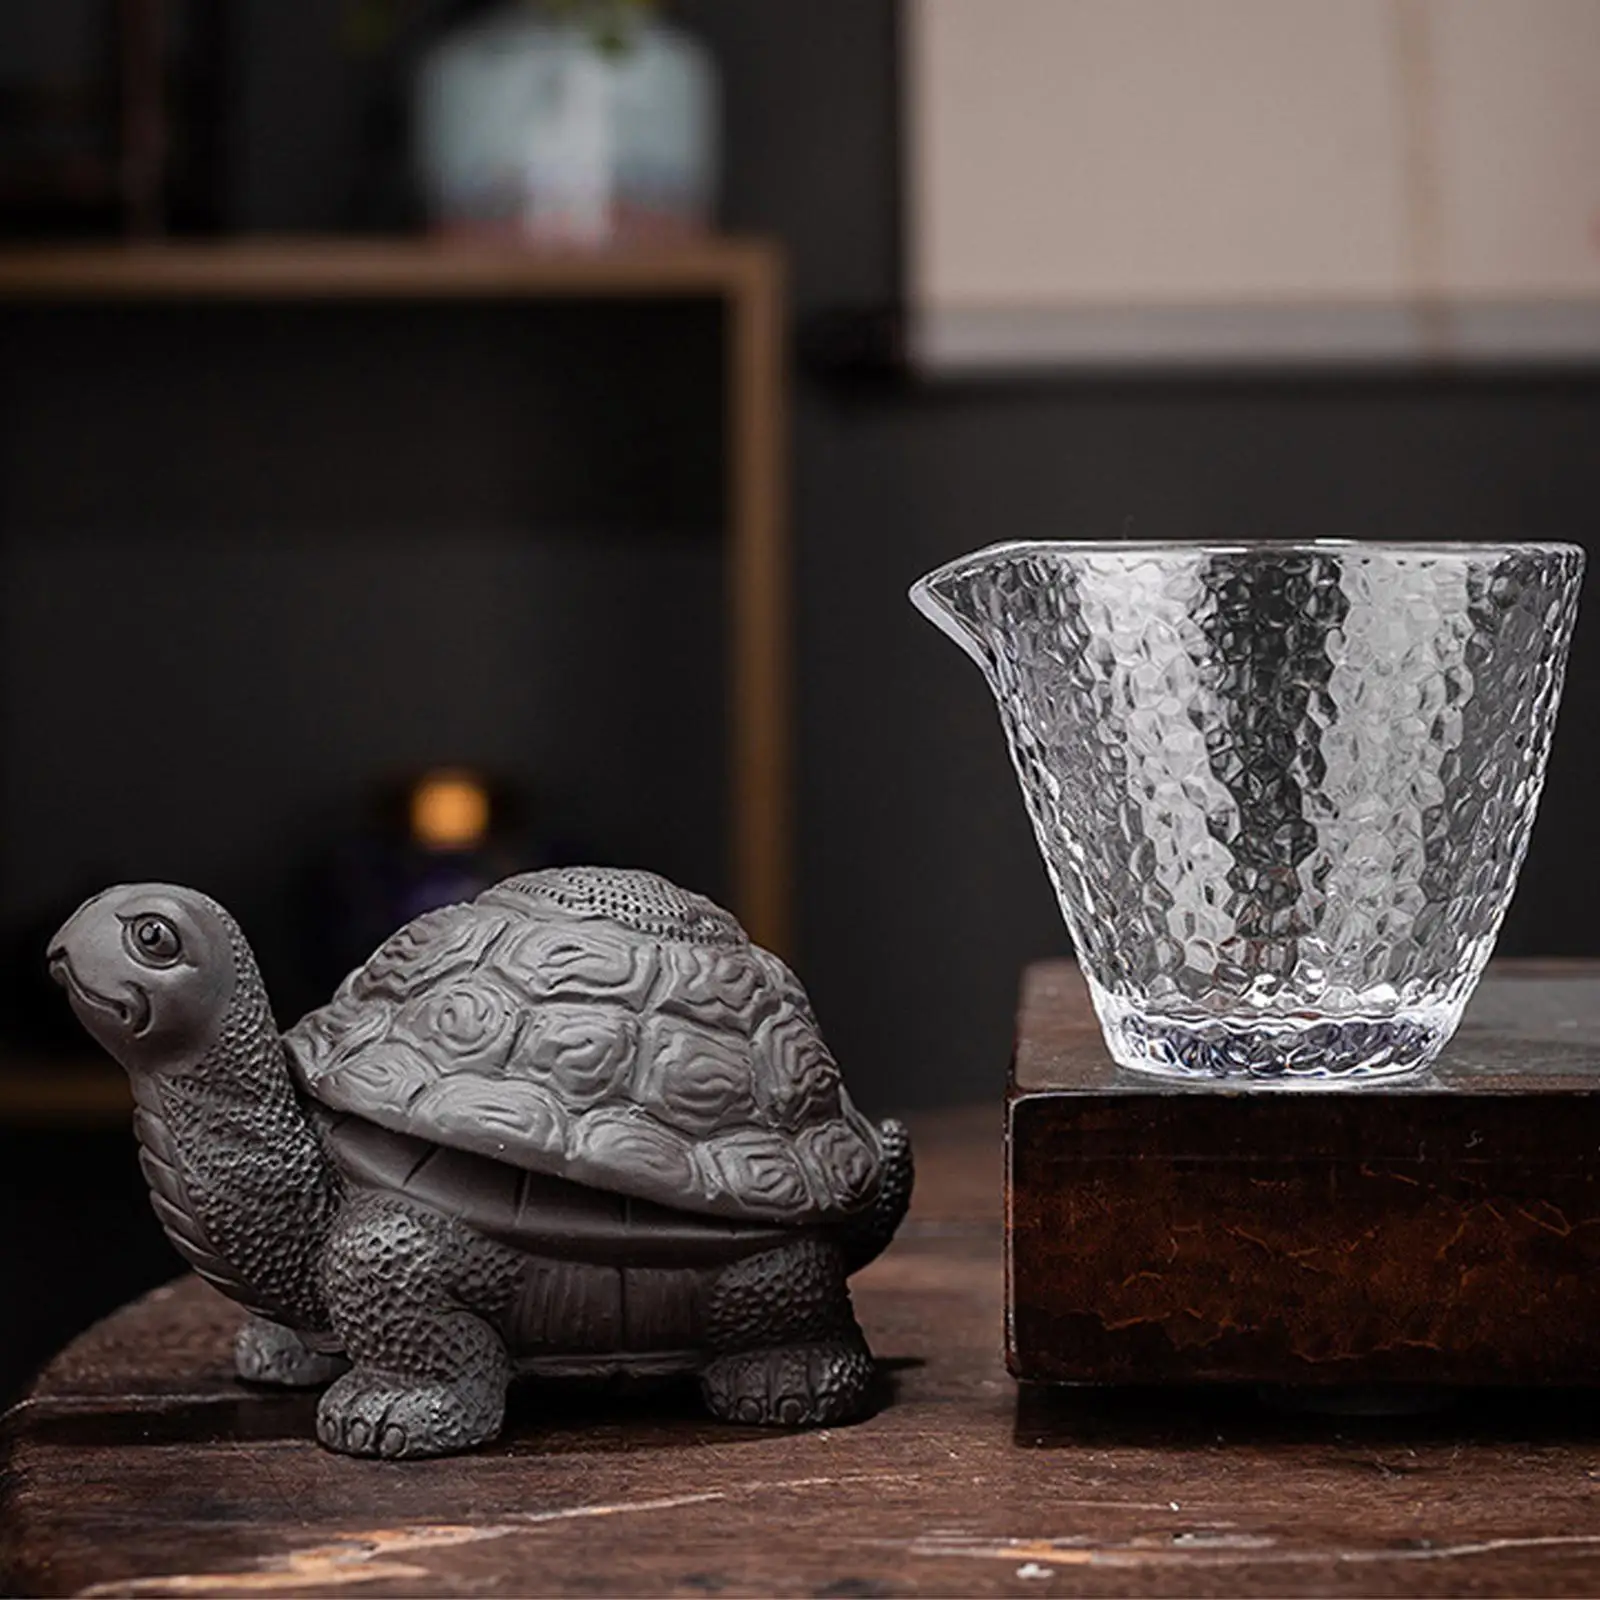 Chinese turtle Ornament Tea Strainer Well Crafted Decorative Crafts Statue for Tabletop Desktop Dining Room